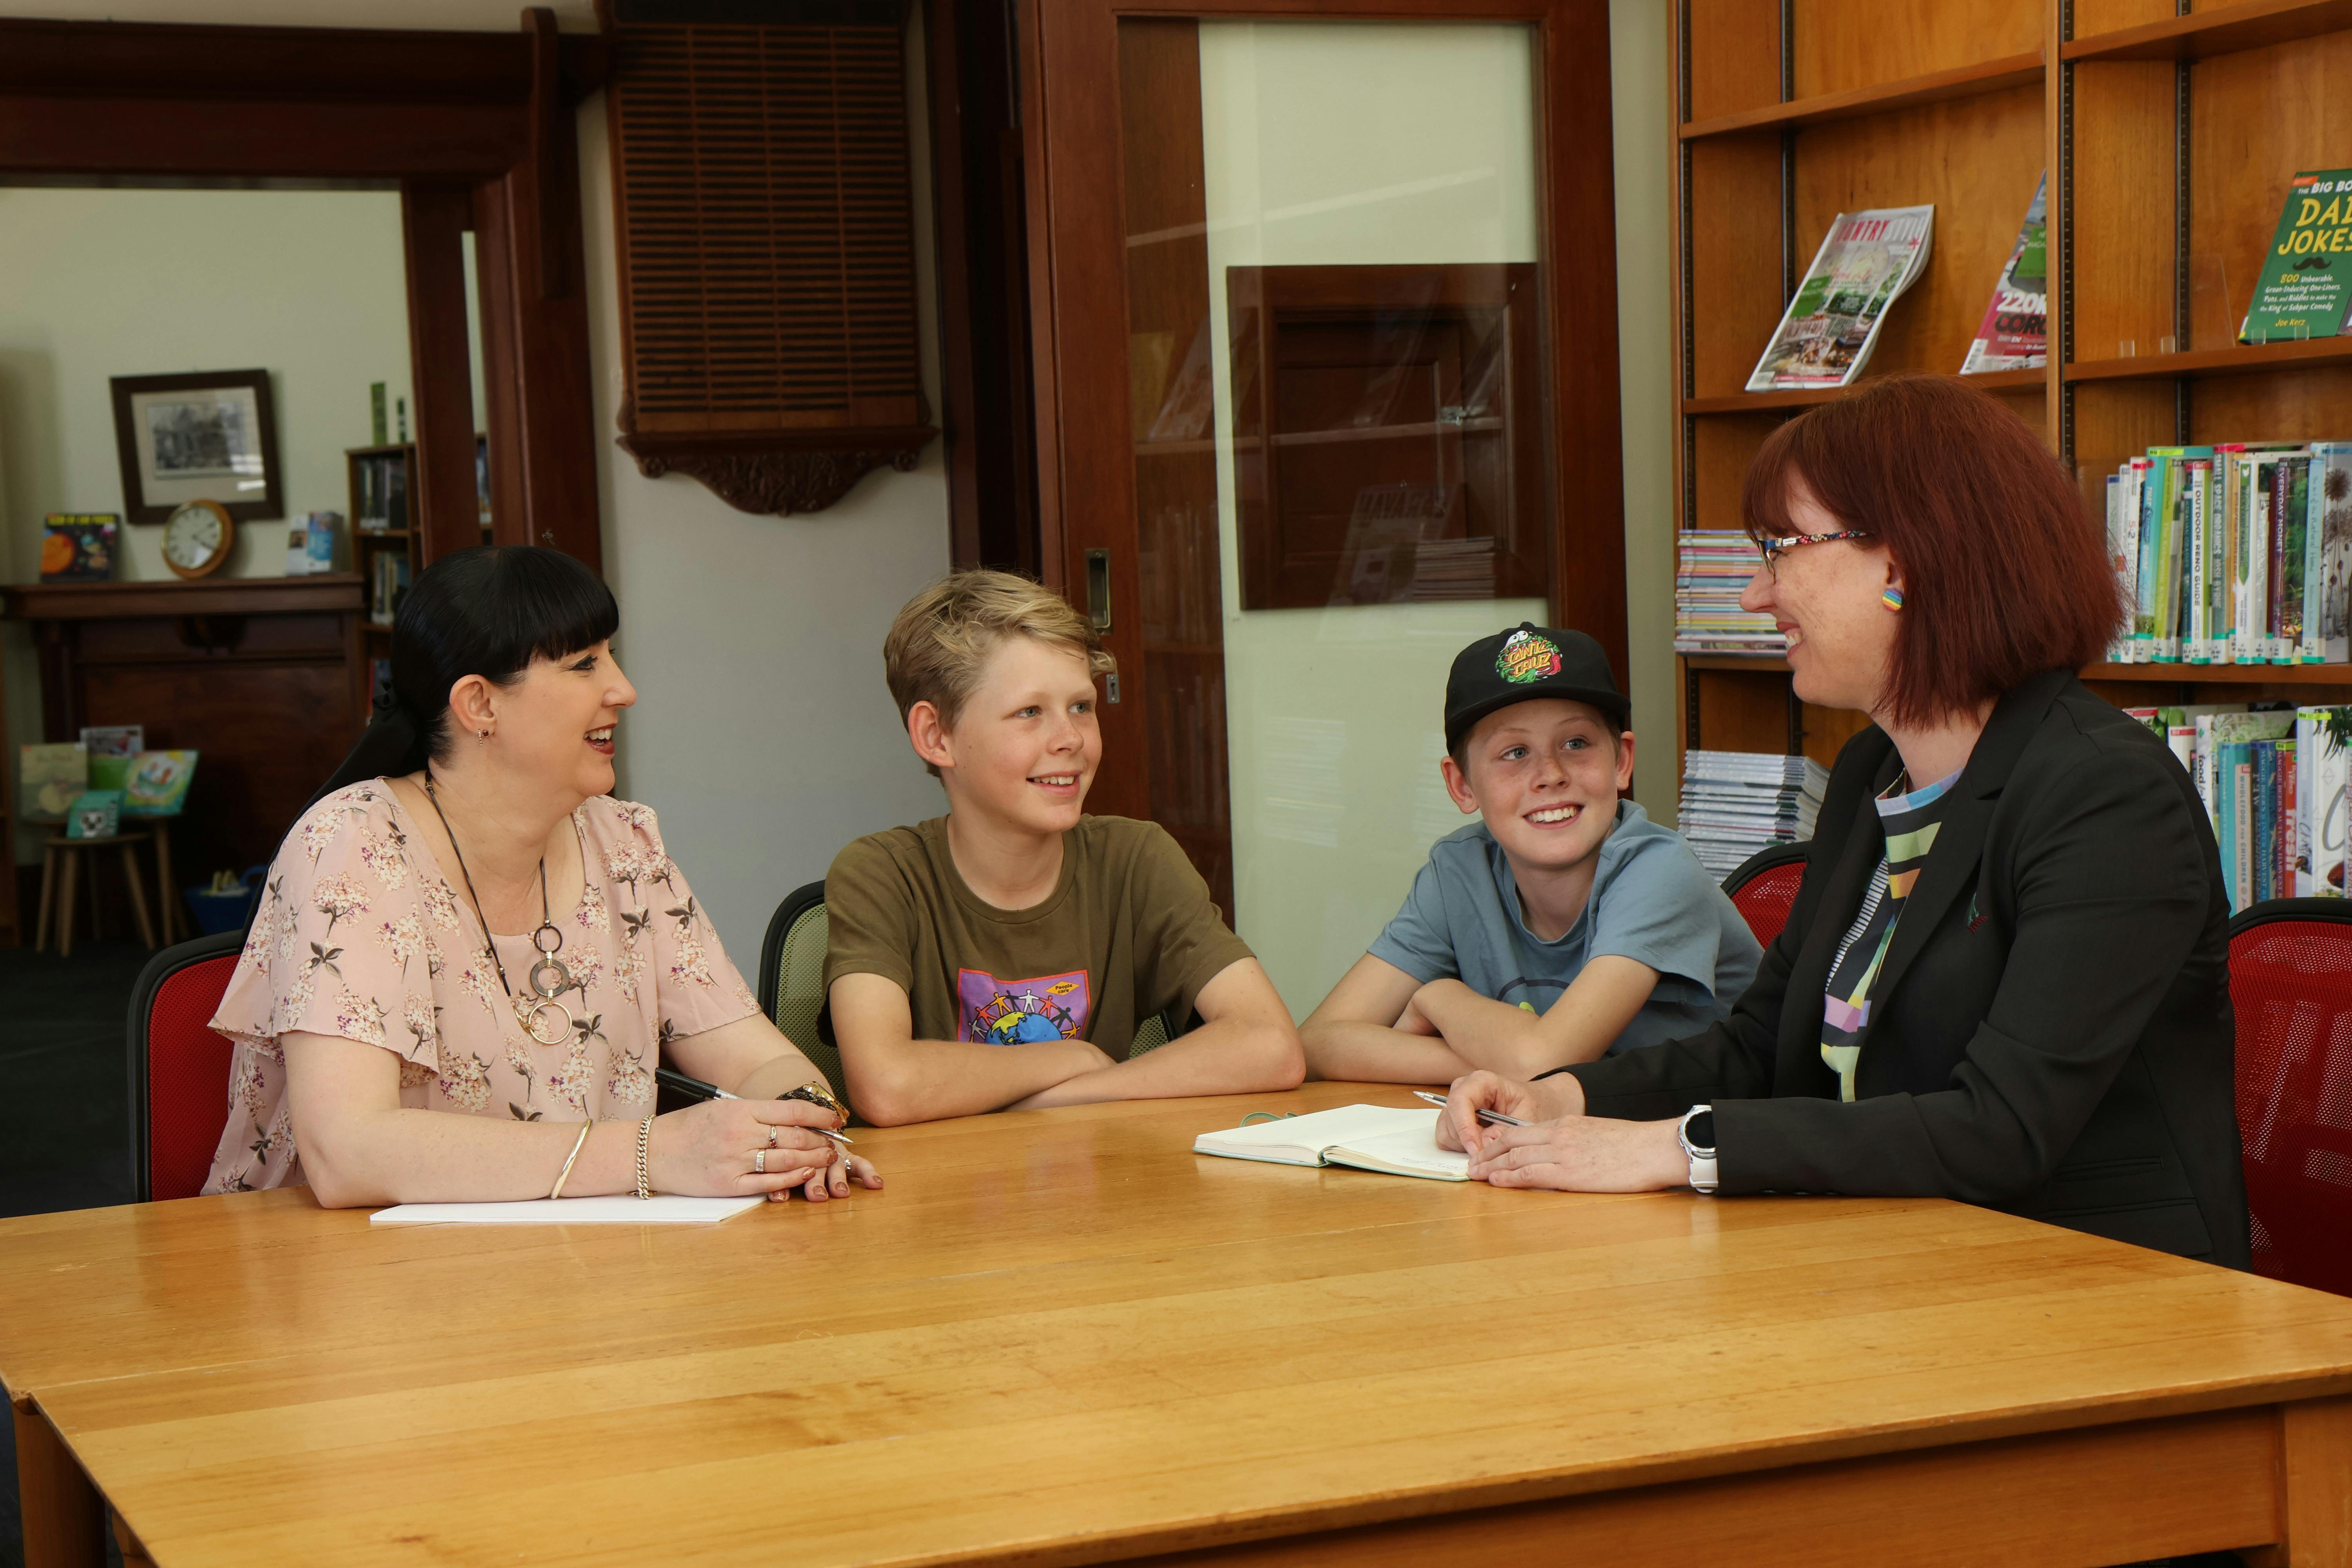 Two Barossa Council staff members having a discussion to two school aged boys around a table in a library space